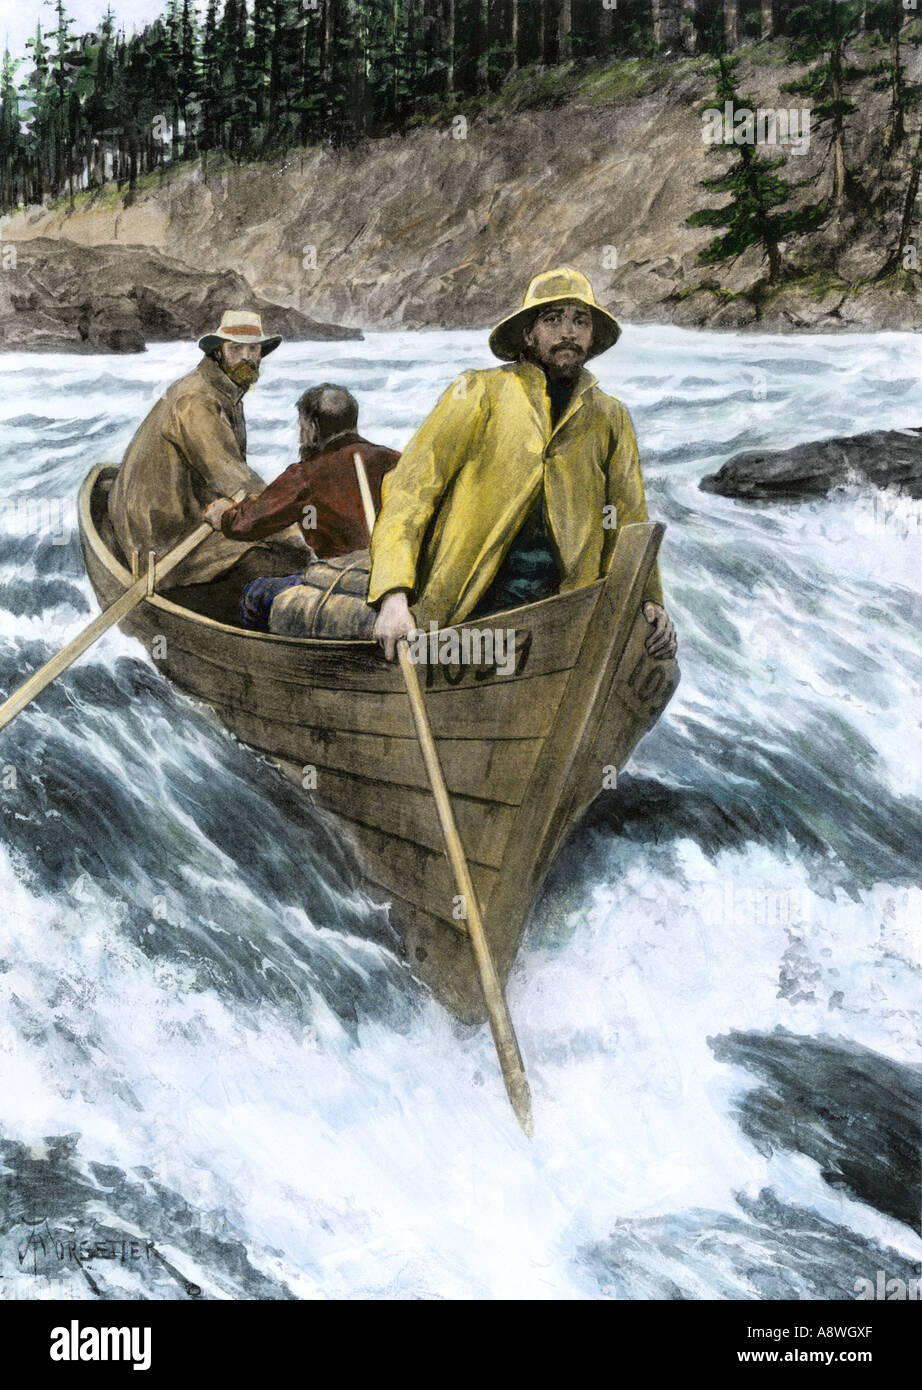 Prospectors risking the  White-Horse rapids of the Yukon River going to the Klondike gold rush 1898. Hand-colored halftone of an illustration Stock Photo